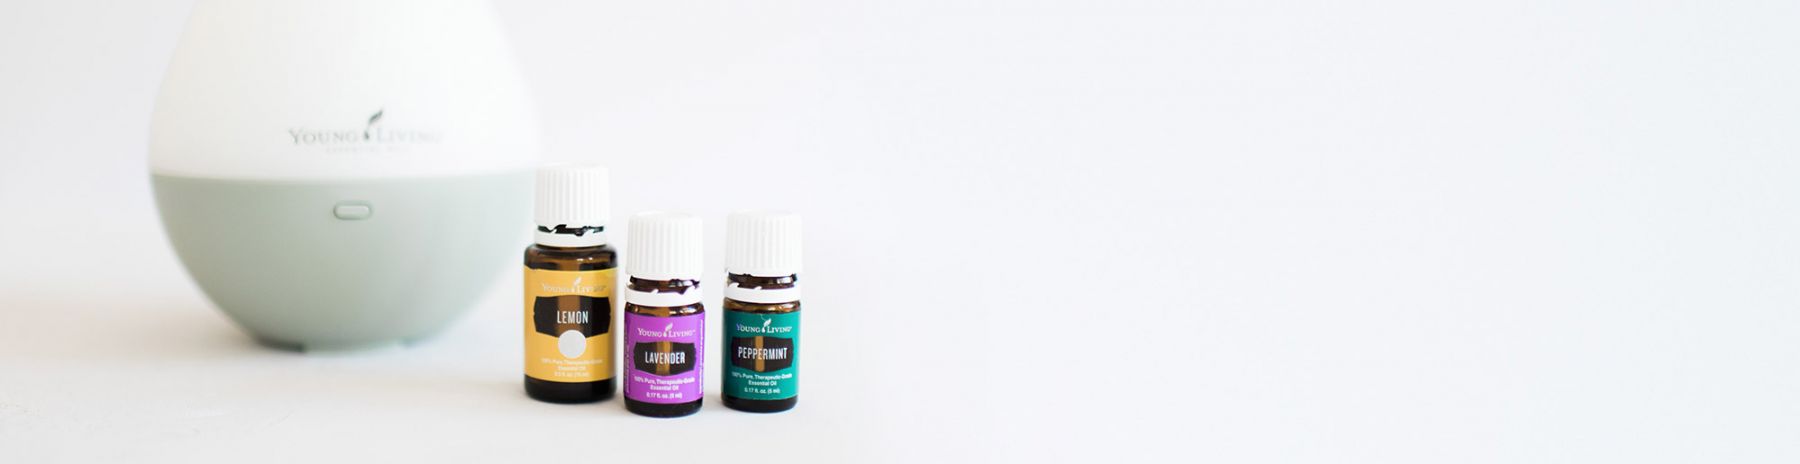 Where to purchase essential oils in Missouri